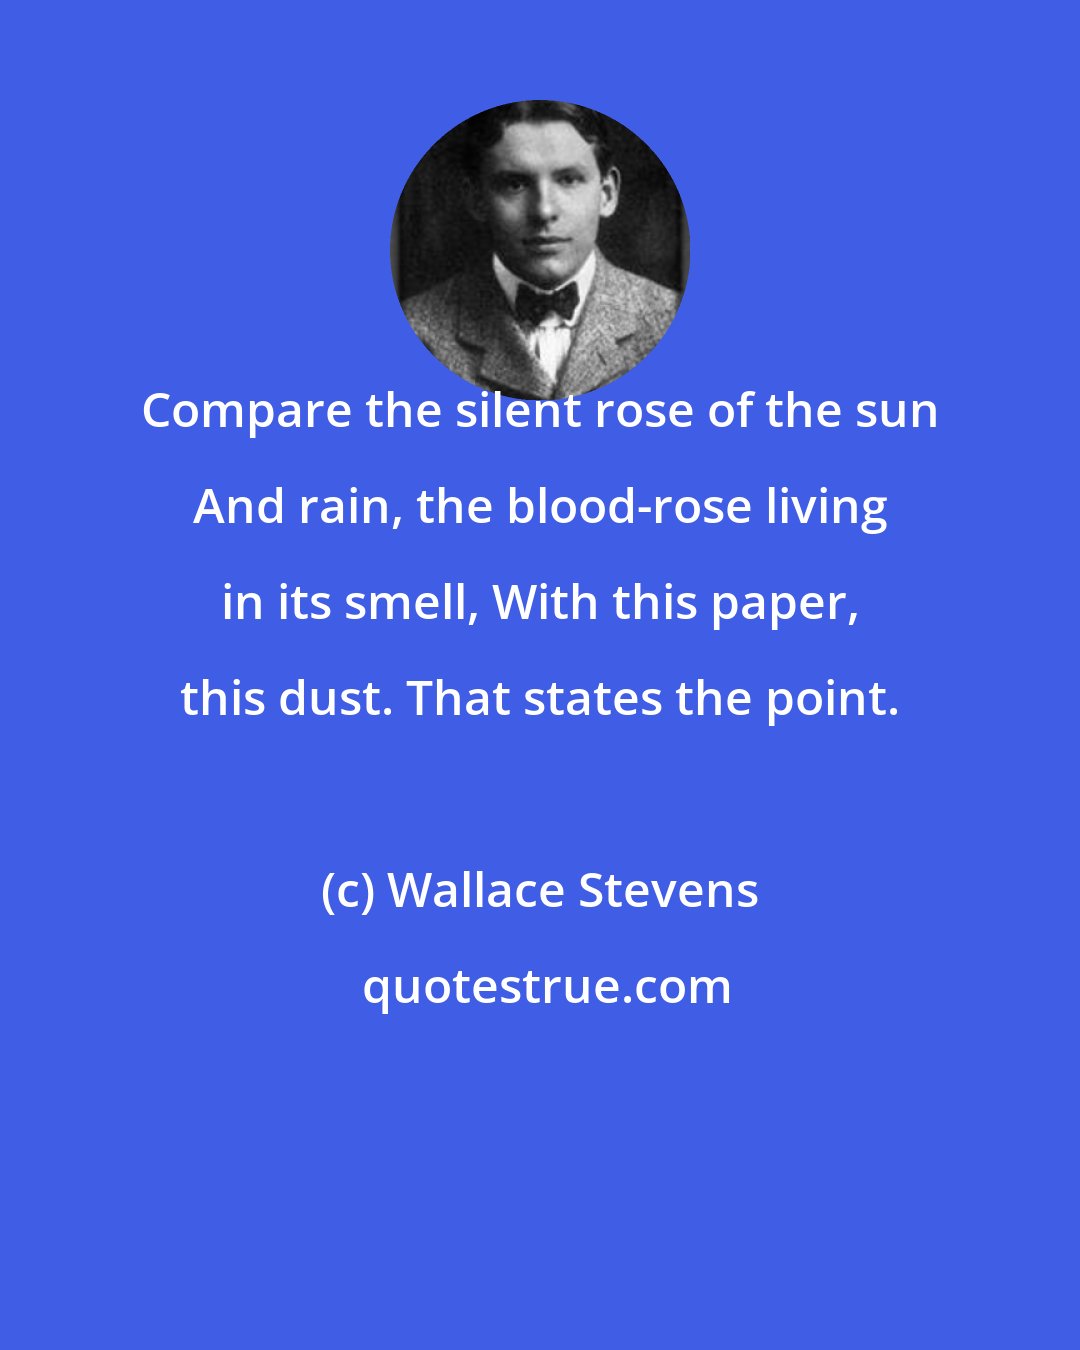 Wallace Stevens: Compare the silent rose of the sun And rain, the blood-rose living in its smell, With this paper, this dust. That states the point.